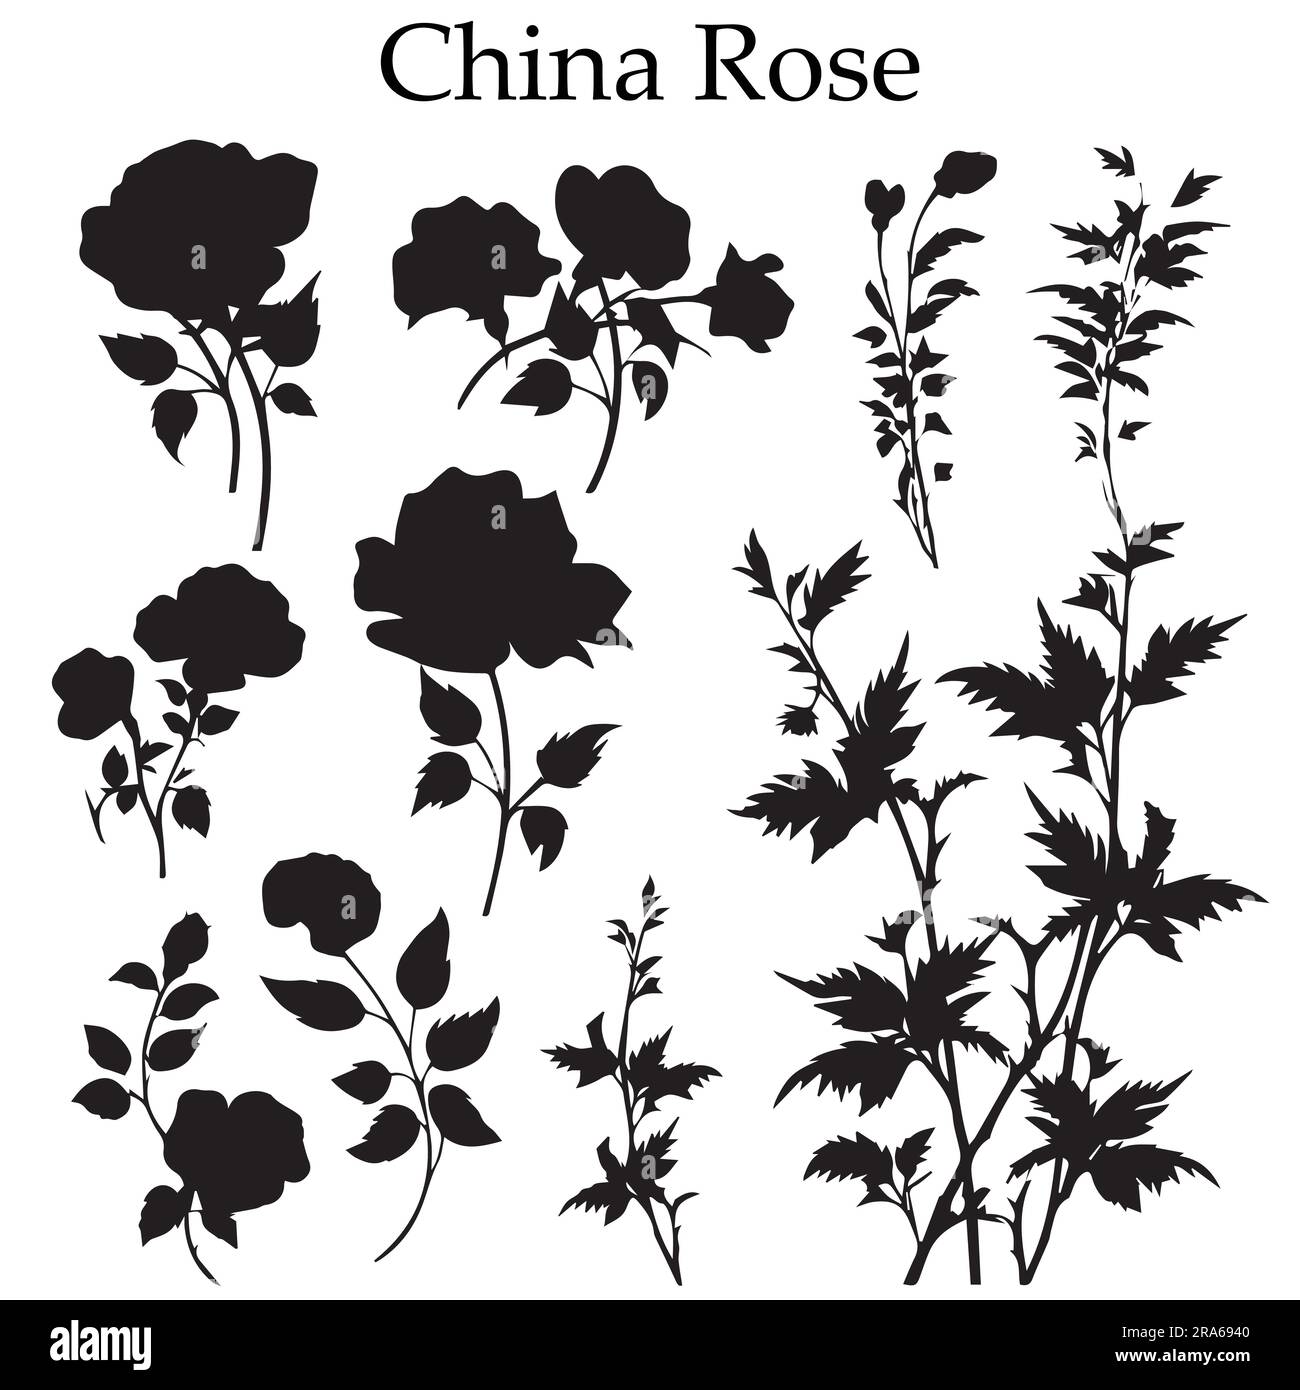 A set of black China Rose flower vector collection Stock Vector